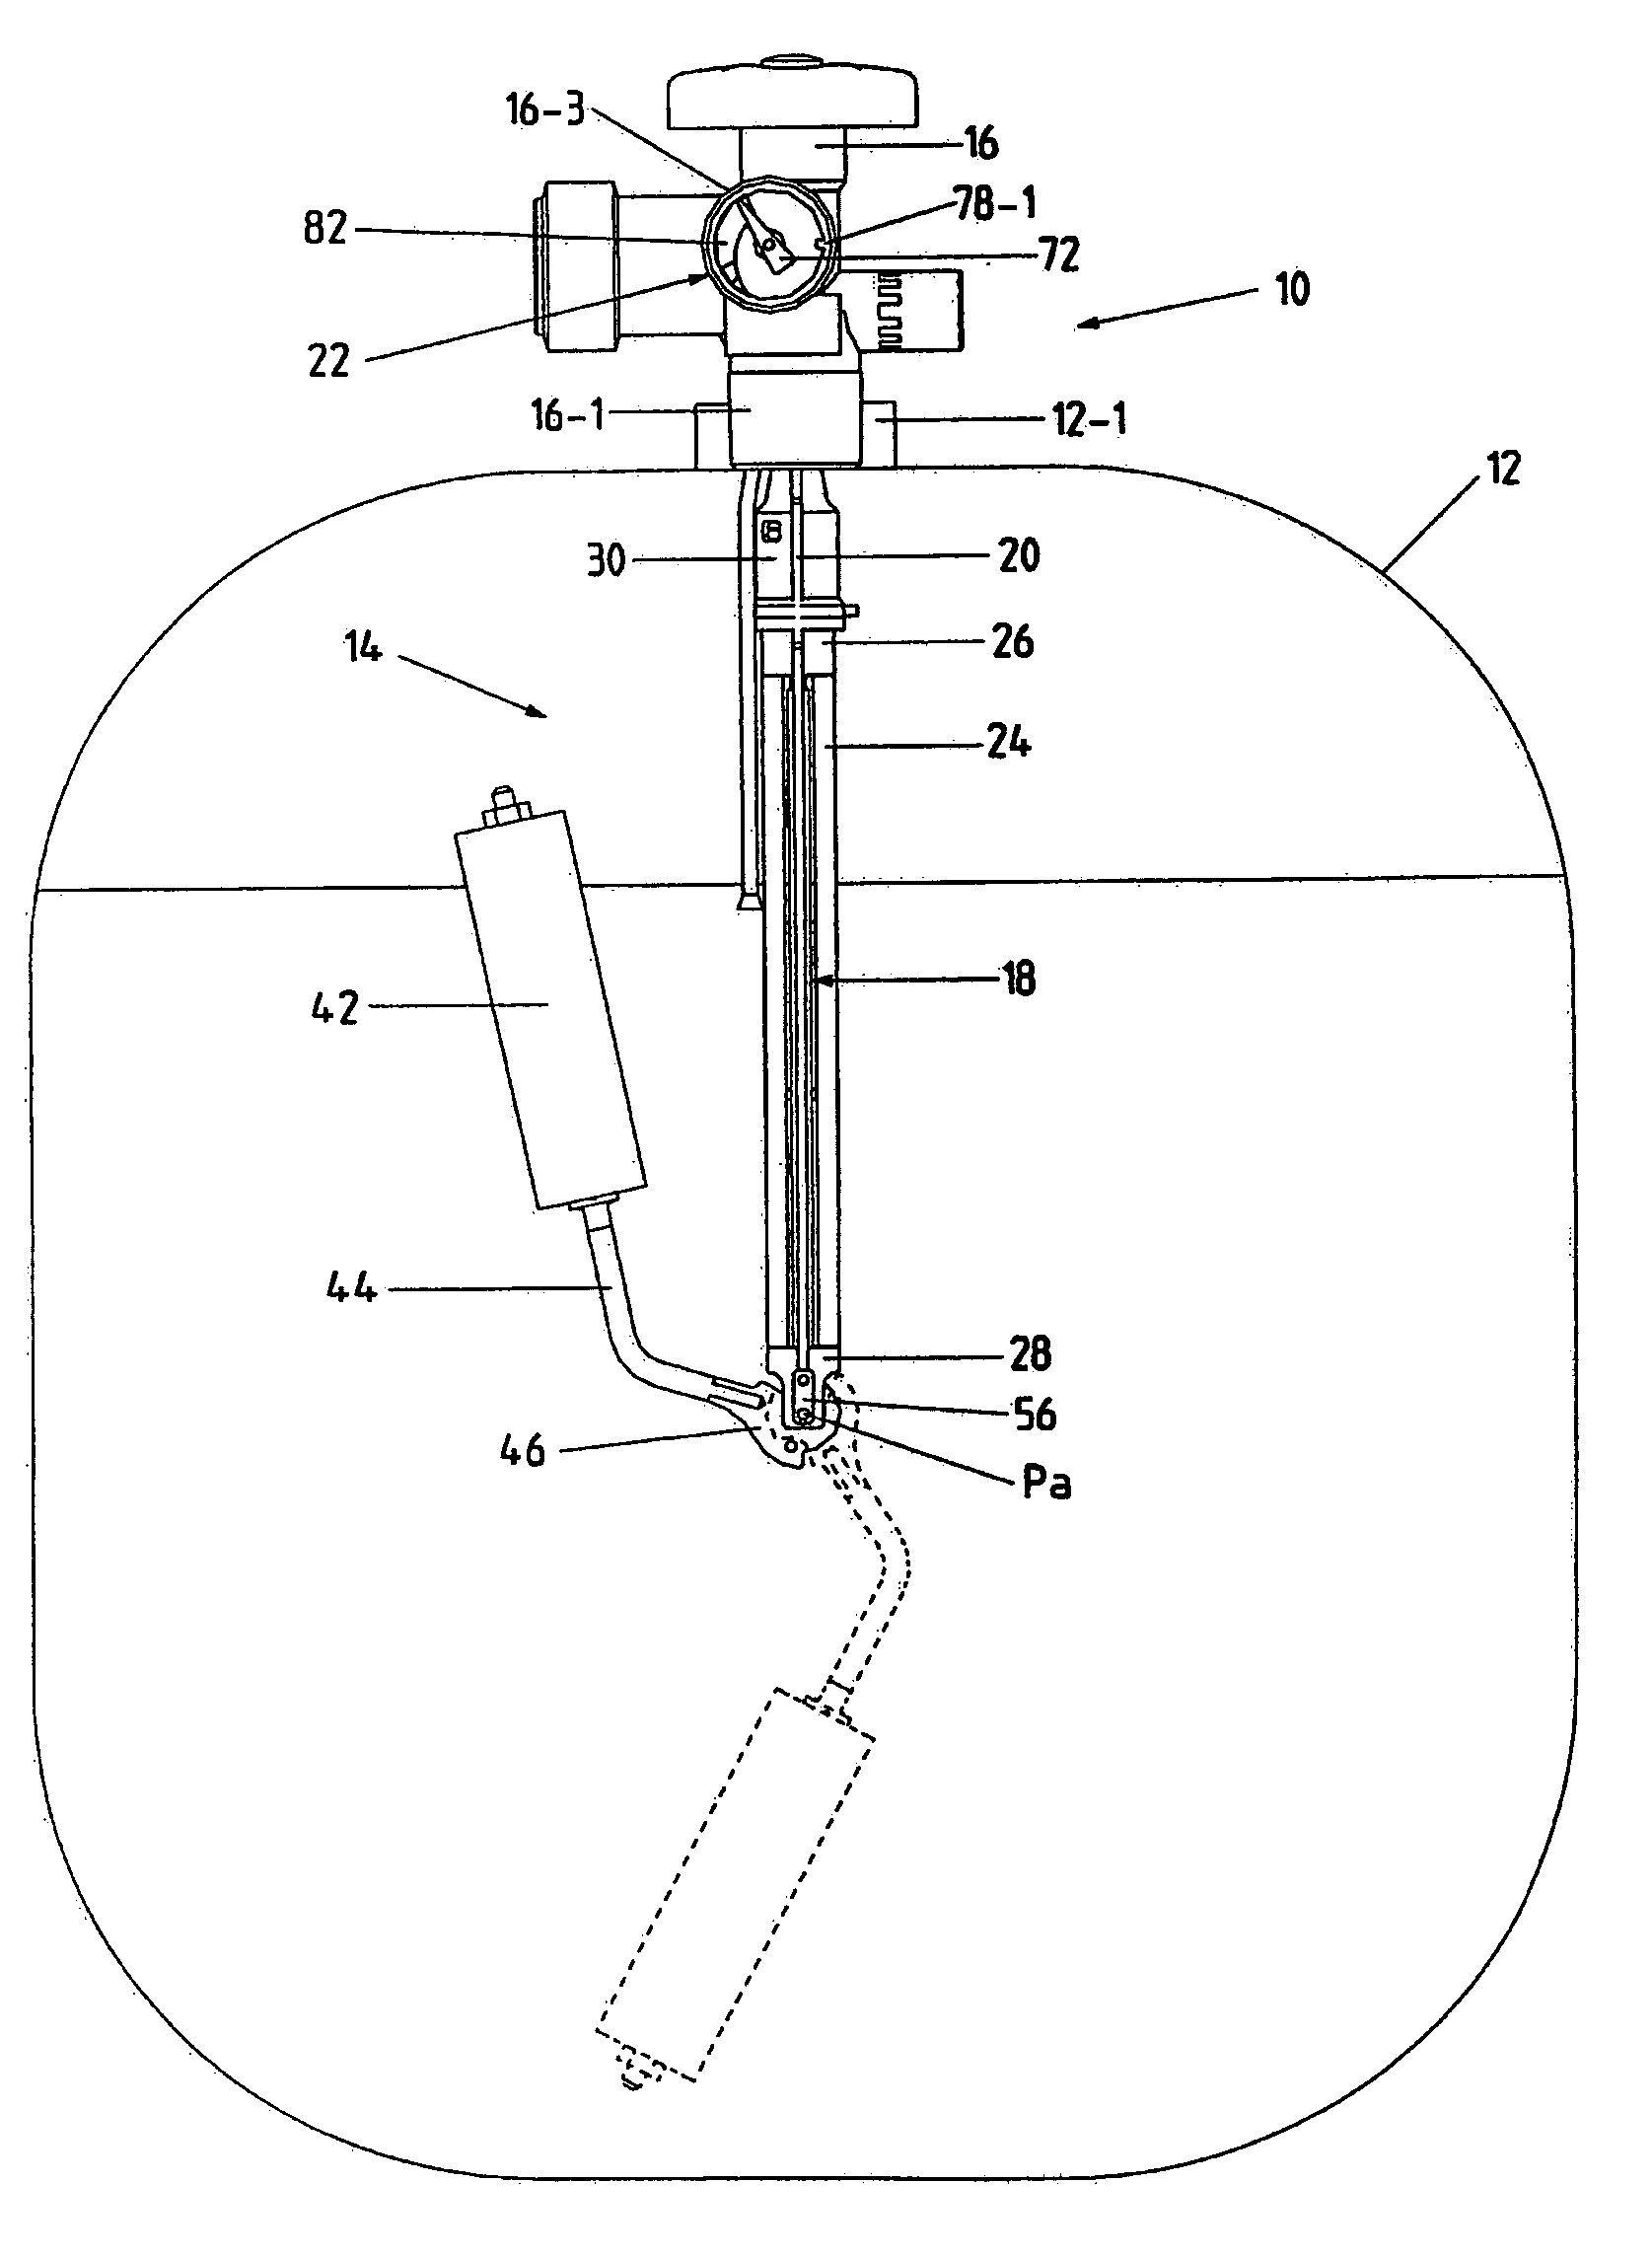 Tap assembly for a liquid vessel having an overfill protection device and a float controlled magnetic level gauge